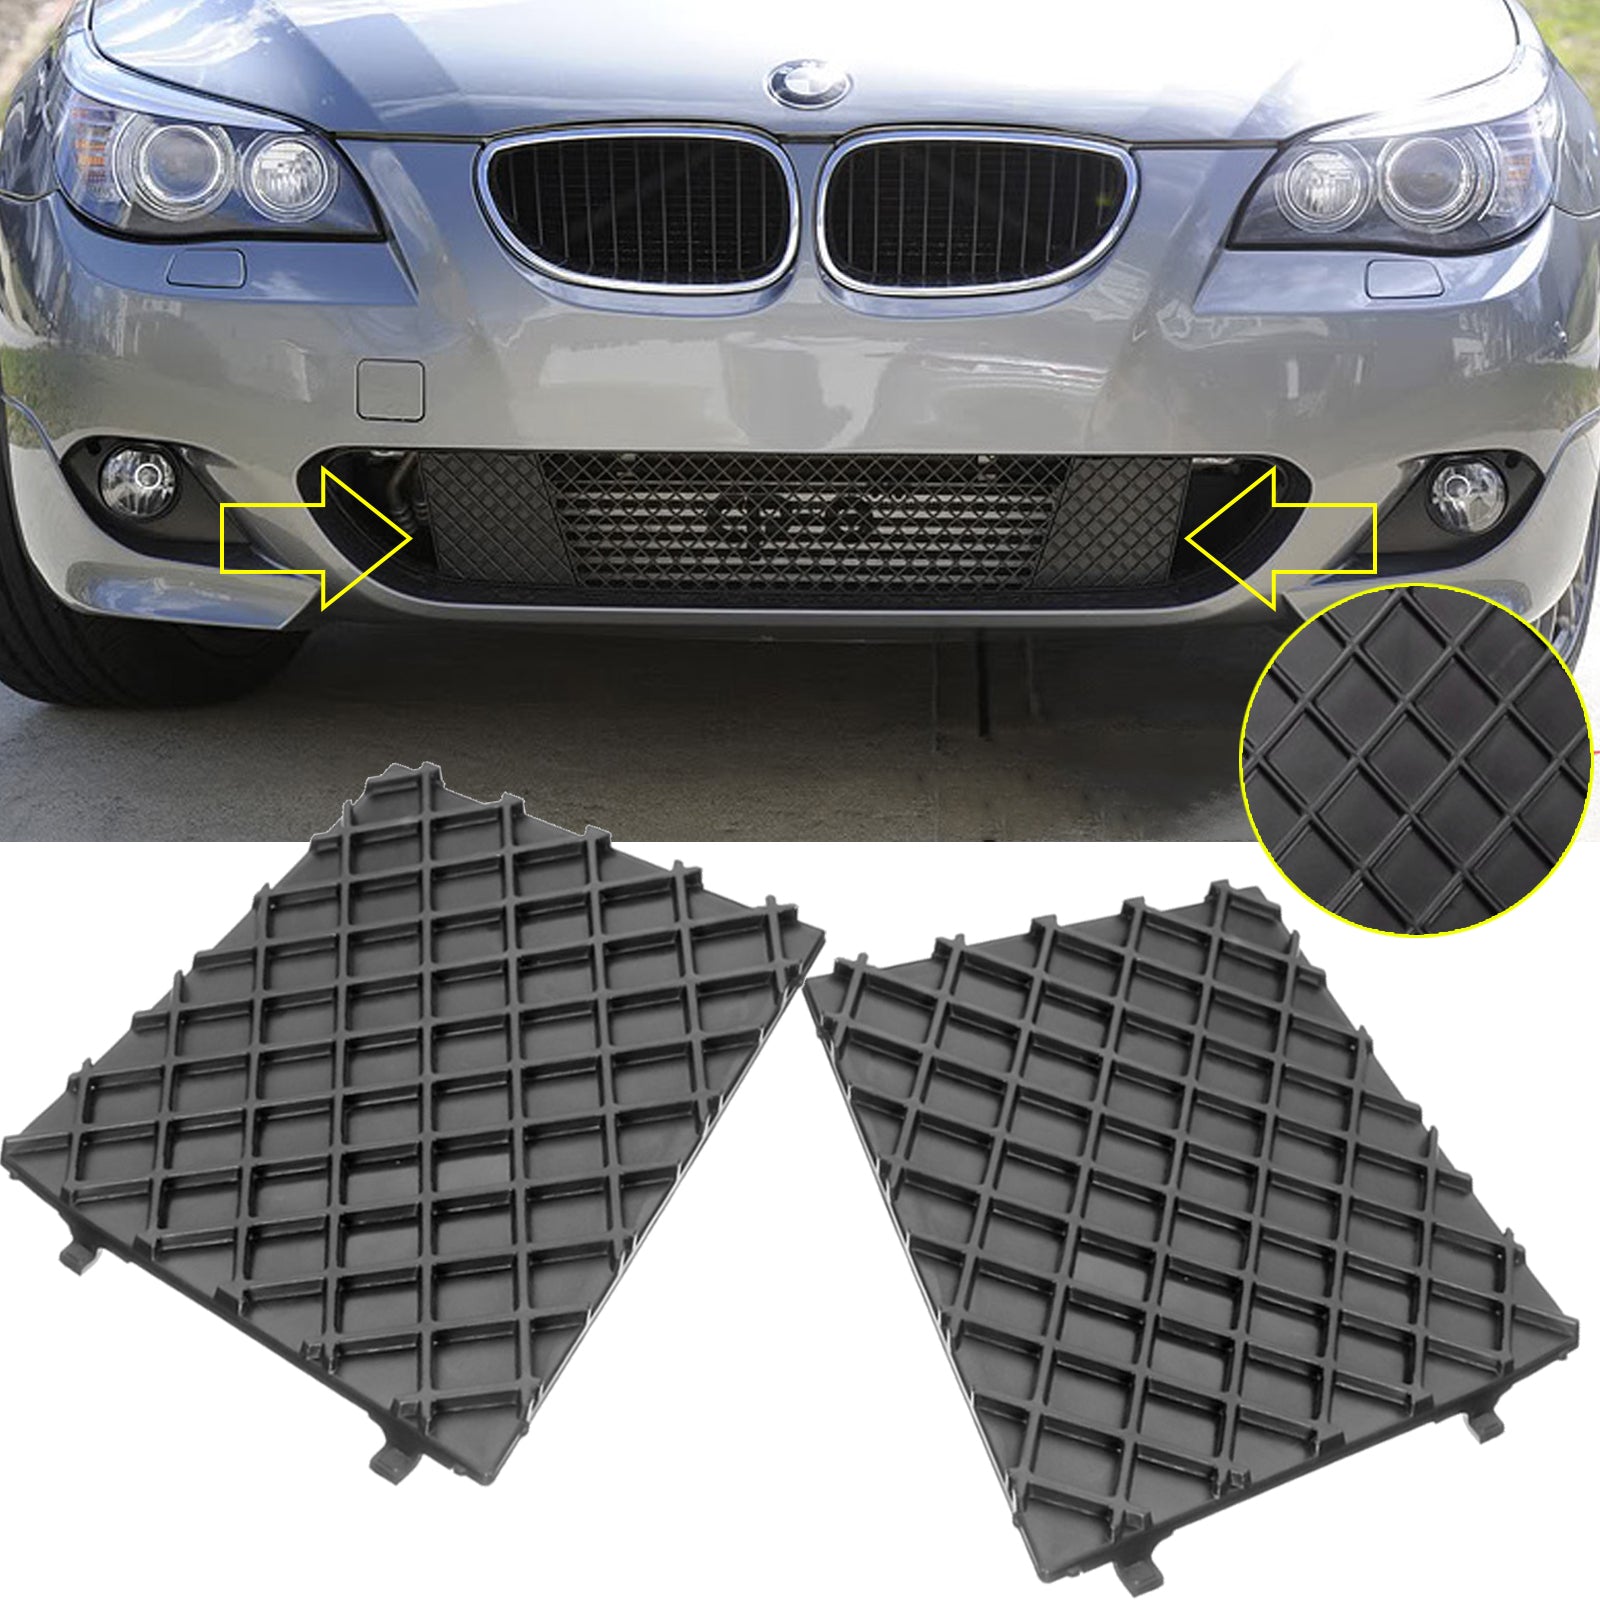 Fydun Right Side Front Bumper Grill Mesh Grille Cover Trim Front Bumper  Grill Cover 1pc for E60 E61 5111 7897 184